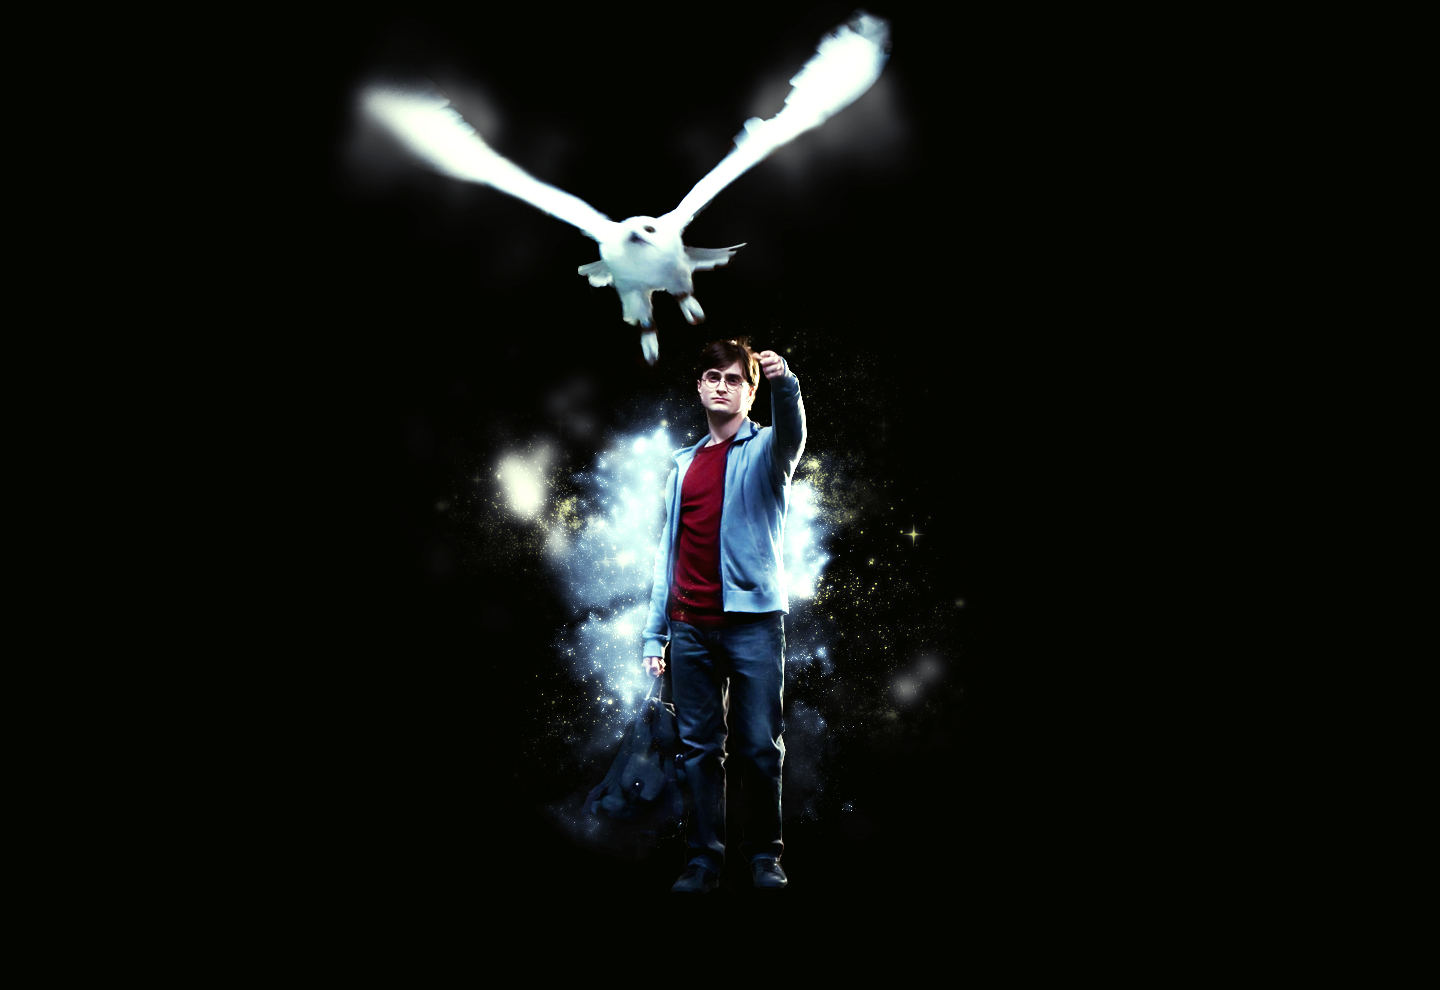 harry potter, owl, daniel radcliffe, movie, harry potter and the deathly hallows: part 1